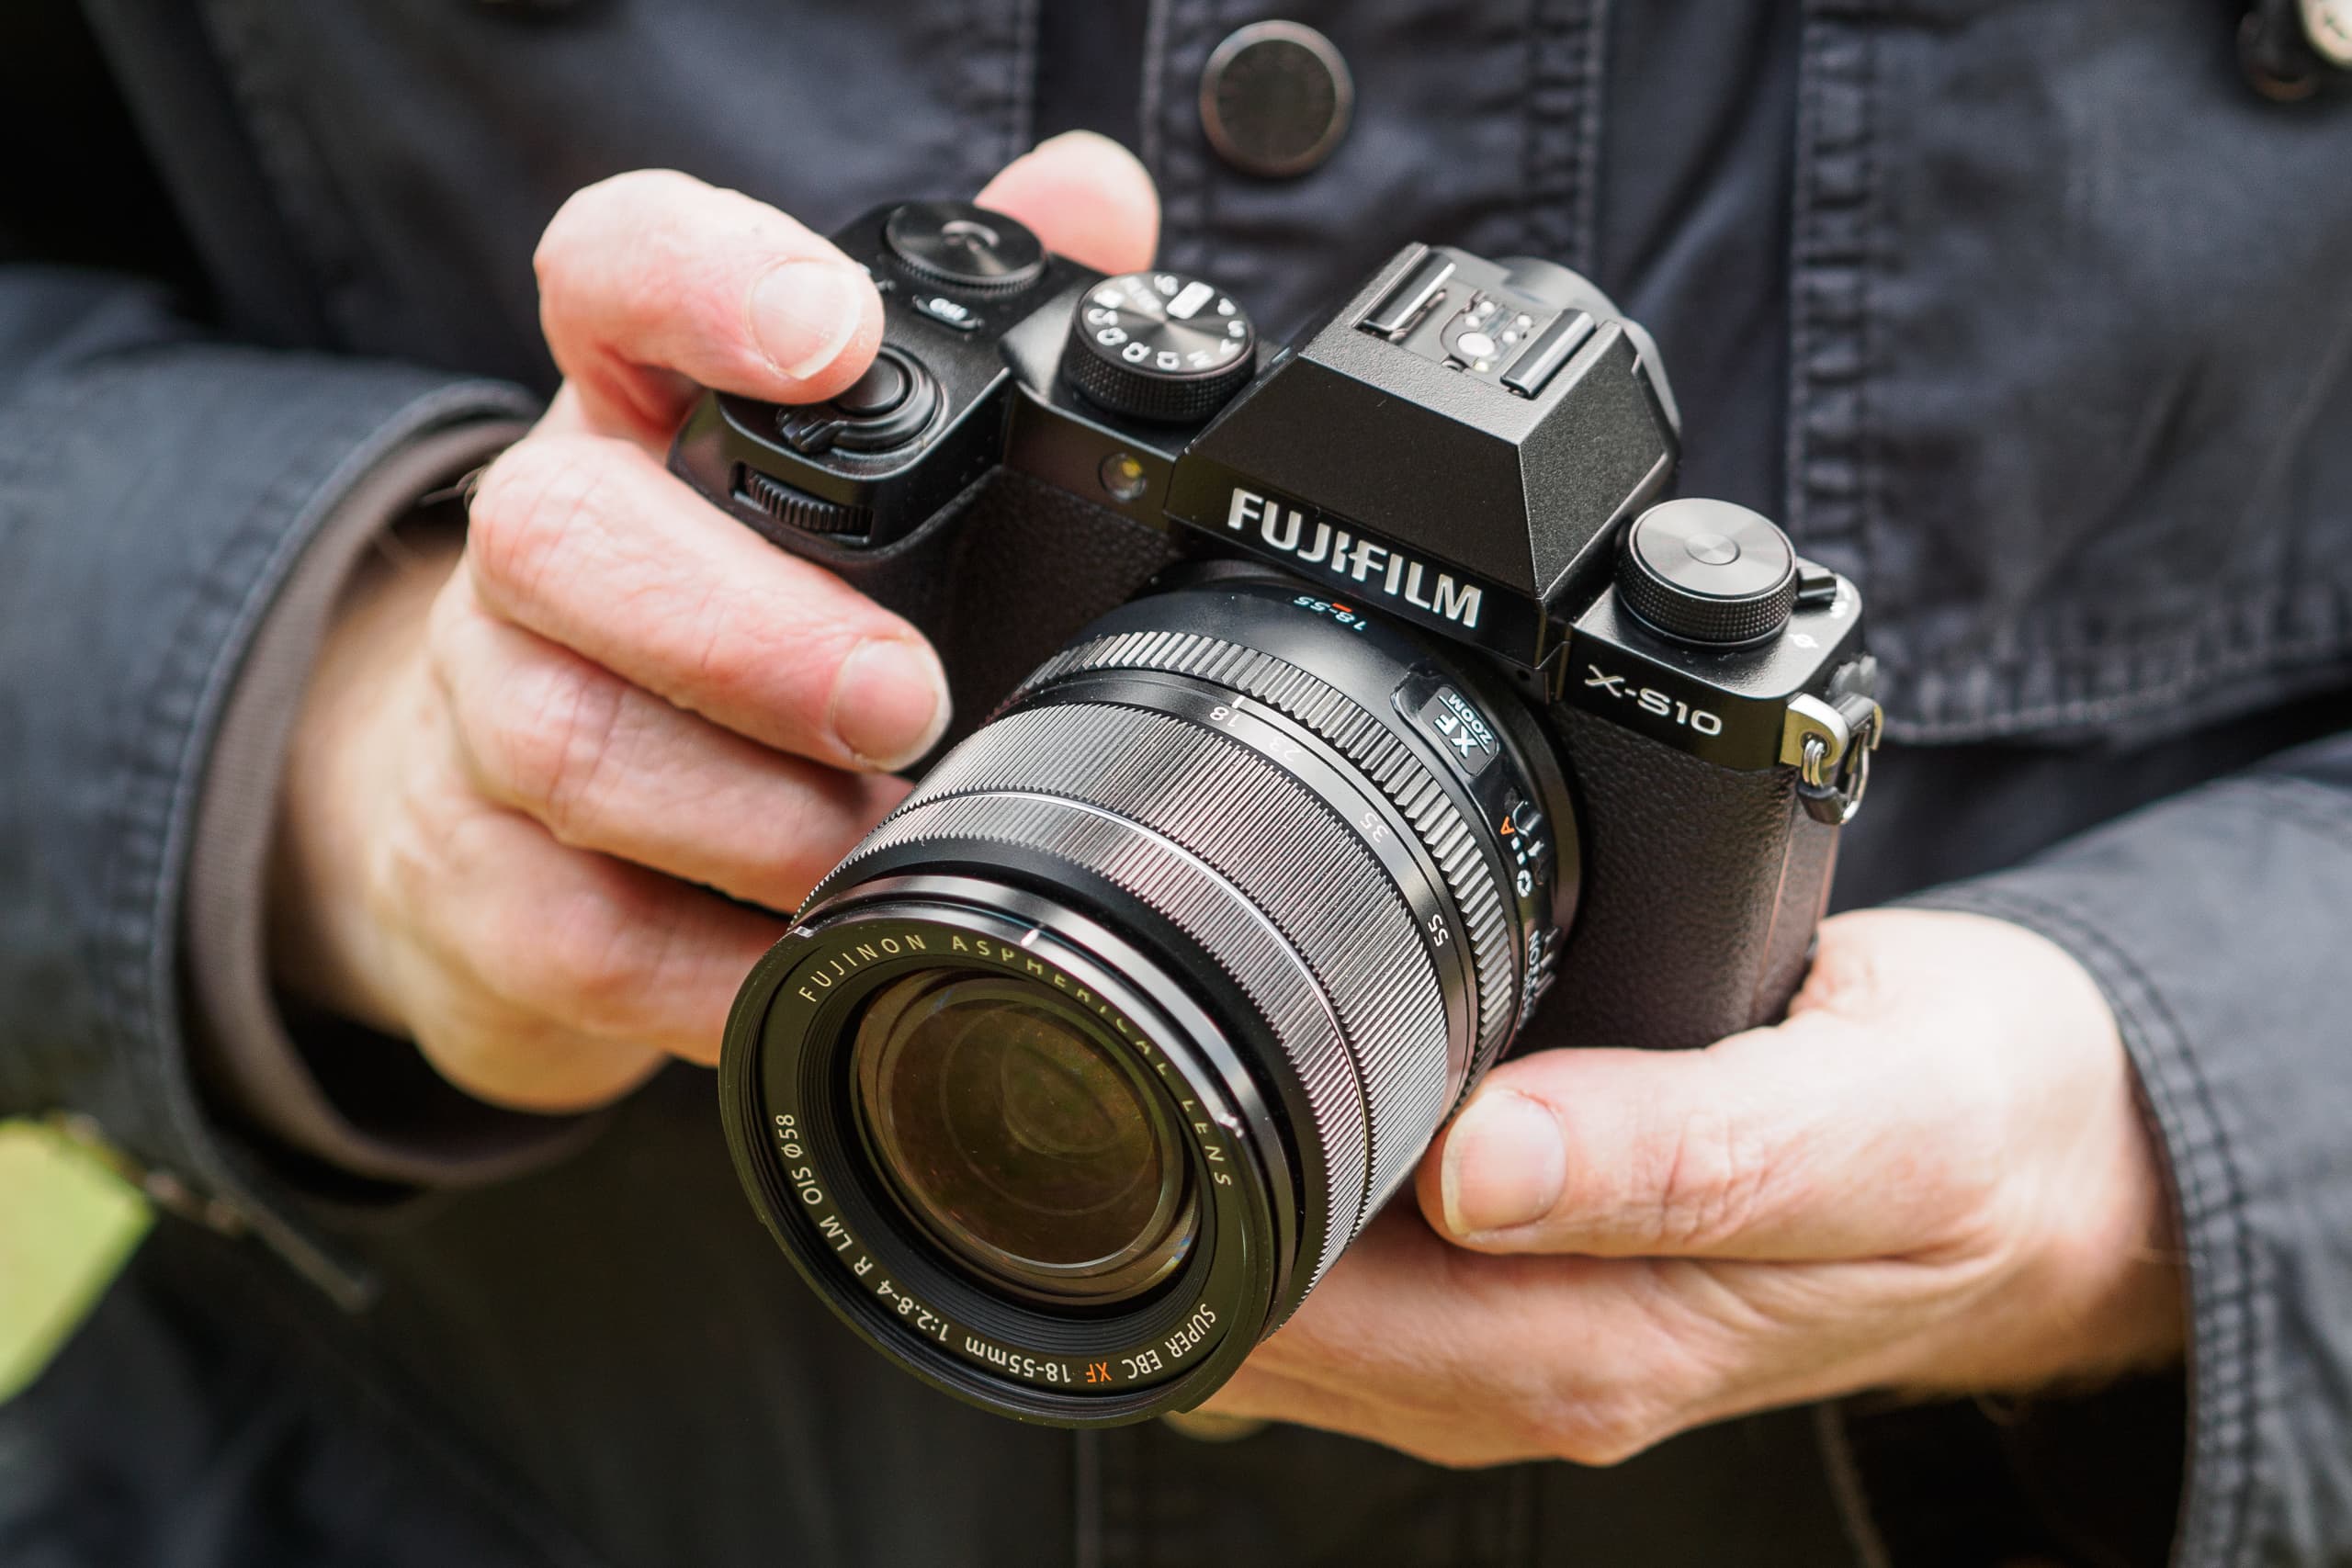 Fujifilm X-S10 Full Review: An Image-stabilized Camera For